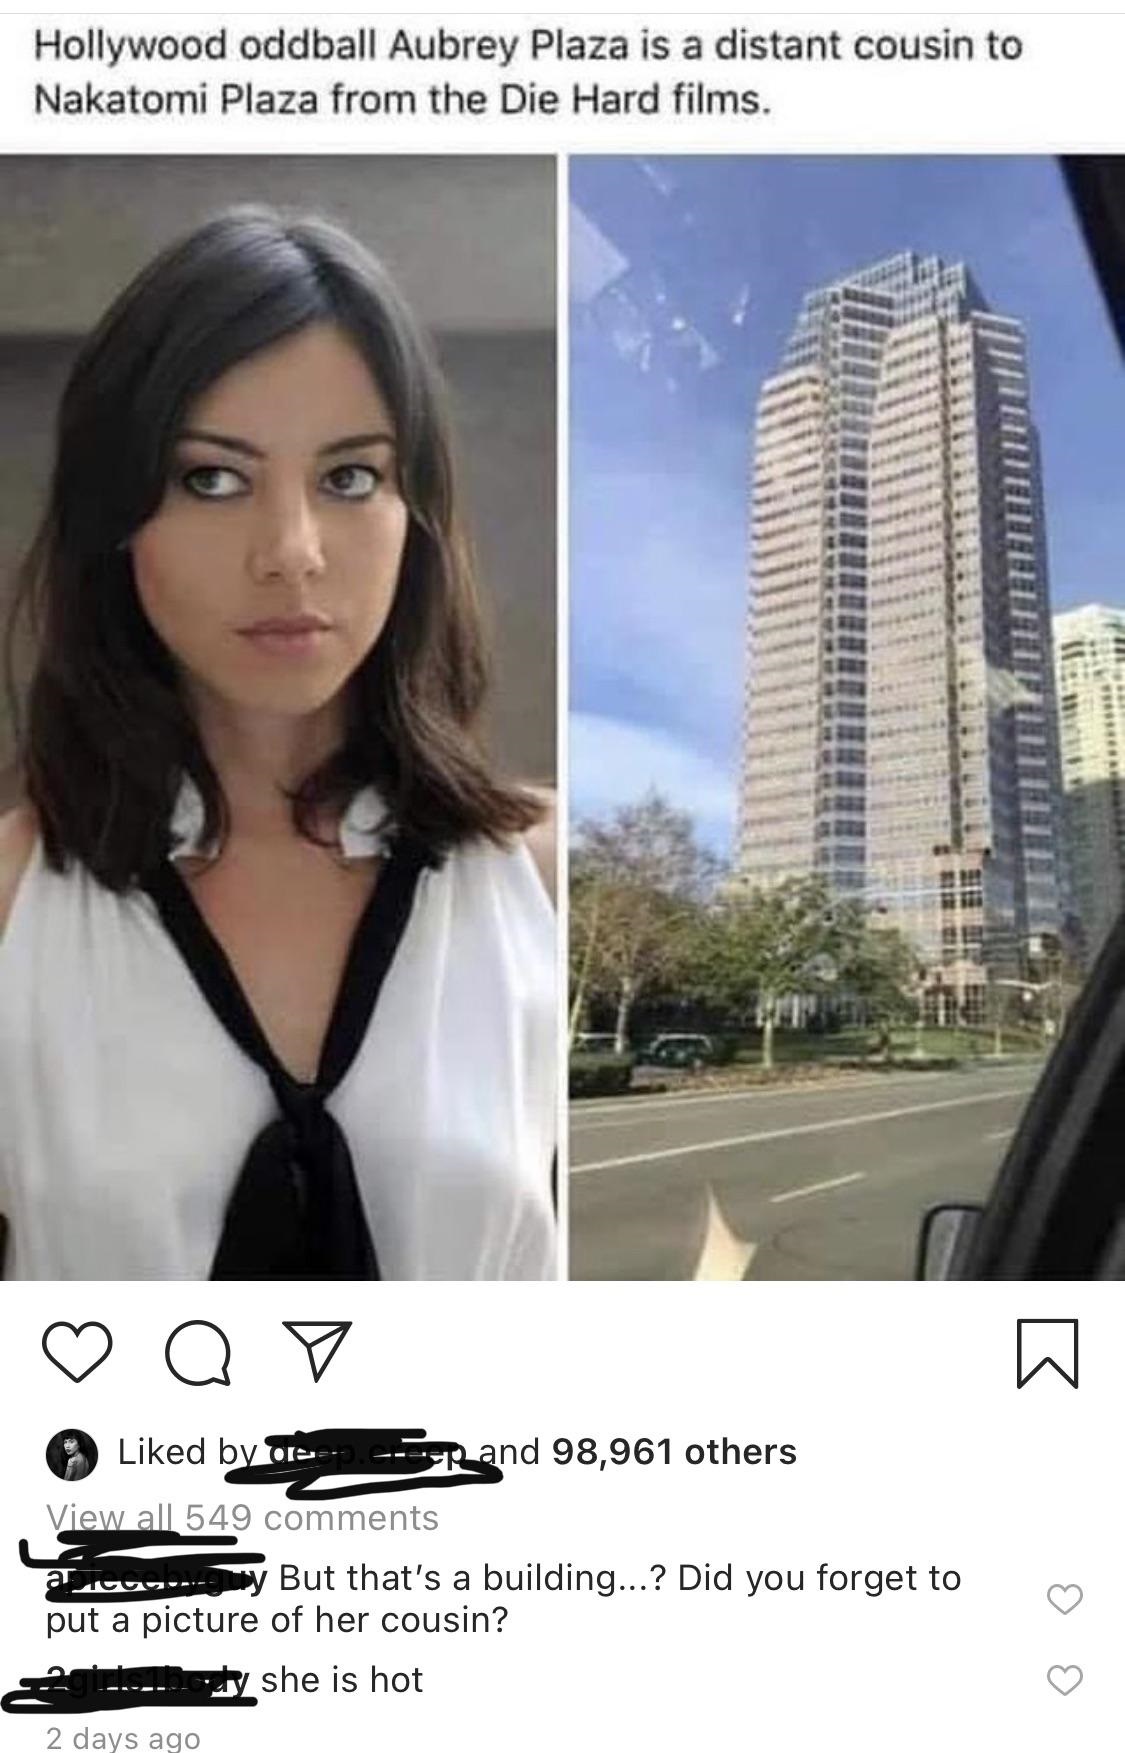 black hair - Hollywood oddball Aubrey Plaza is a distant cousin to Nakatomi Plaza from the Die Hard films. O B d by or Rand 98,961 others View all 549 But that's a building...? Did you forget to put a picture of her cousin? she is hot 10U 2 days ago